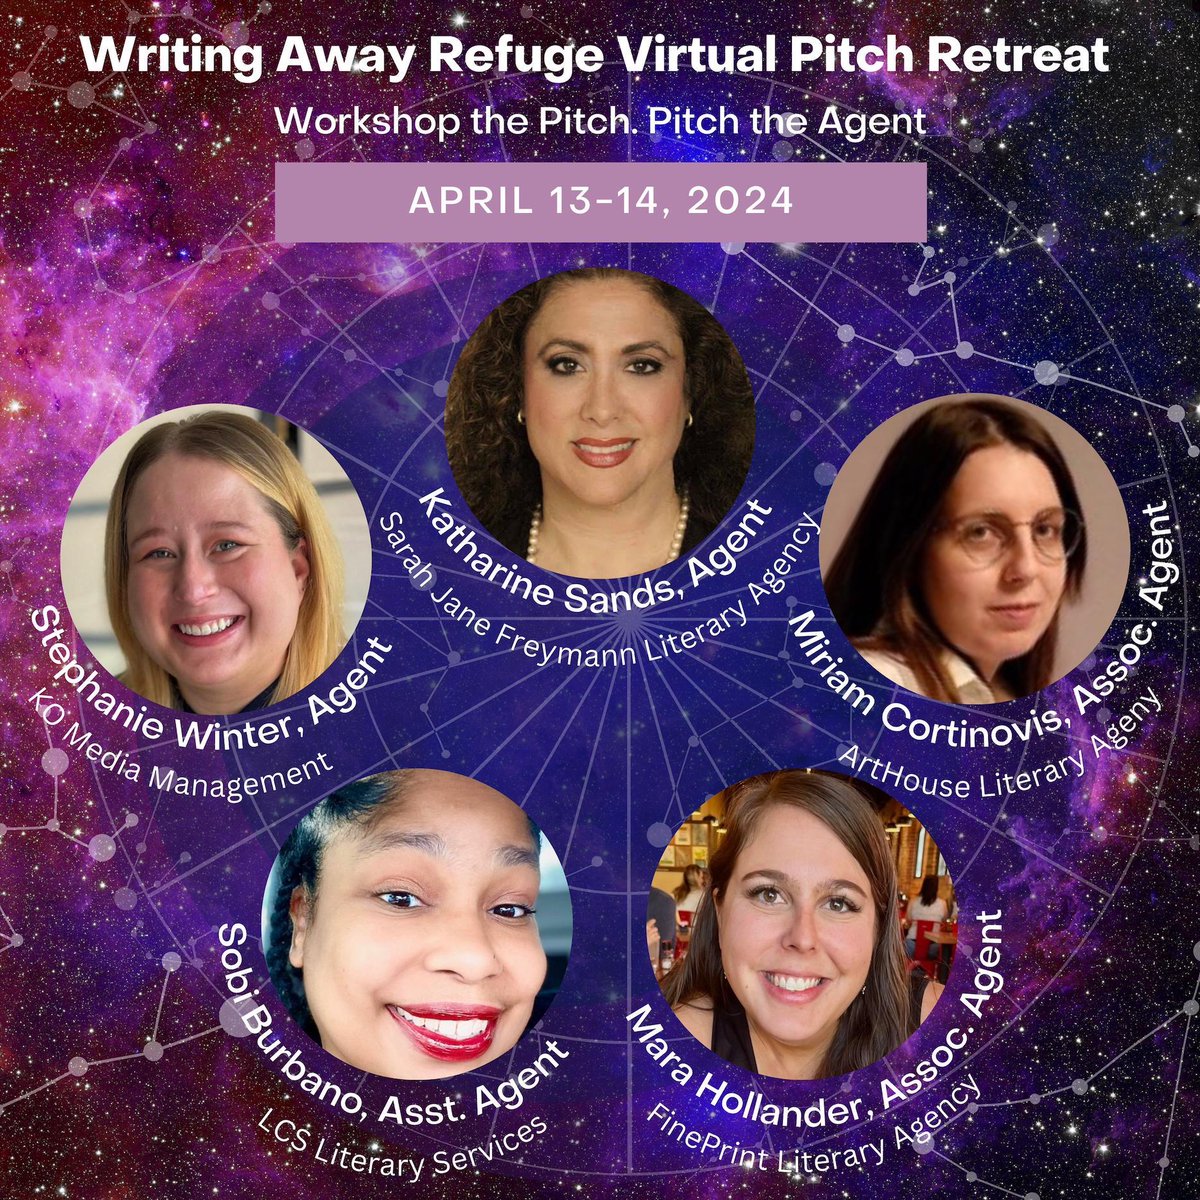 This weekend I'll be joining the Writing Away Refuge pitch event for the first time, and I have one spot left! You can explore the workshop offerings here: writingawayrefuge.com/about-1 I'll be teaching a workshop on querying, too! Come join the fun. 😀